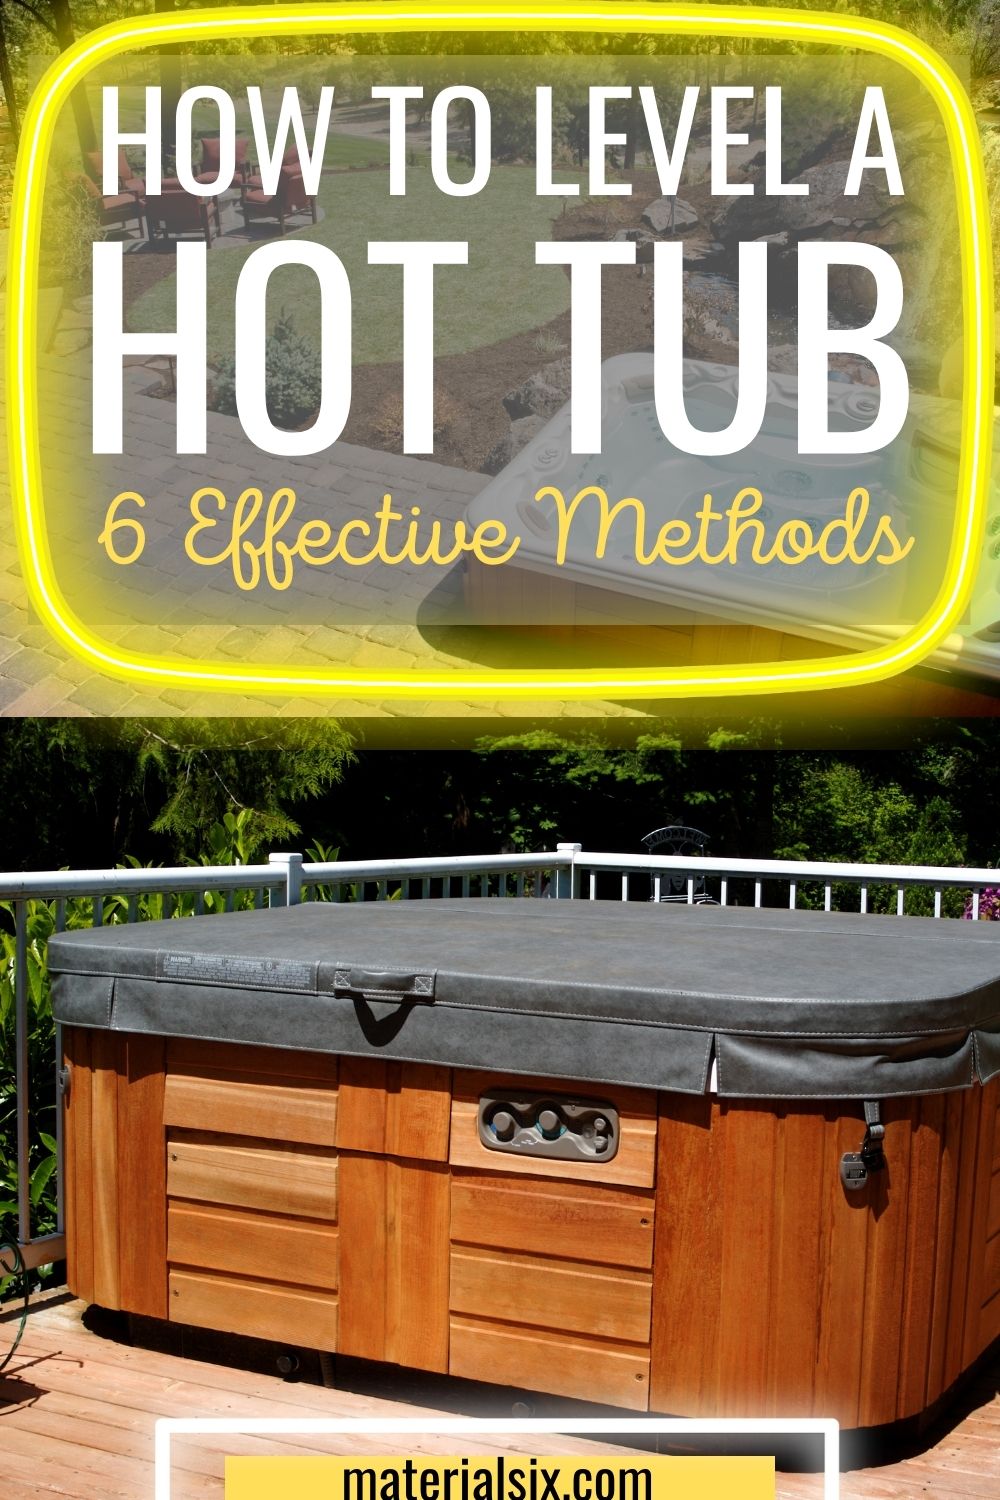 How to Level a Hot Tub